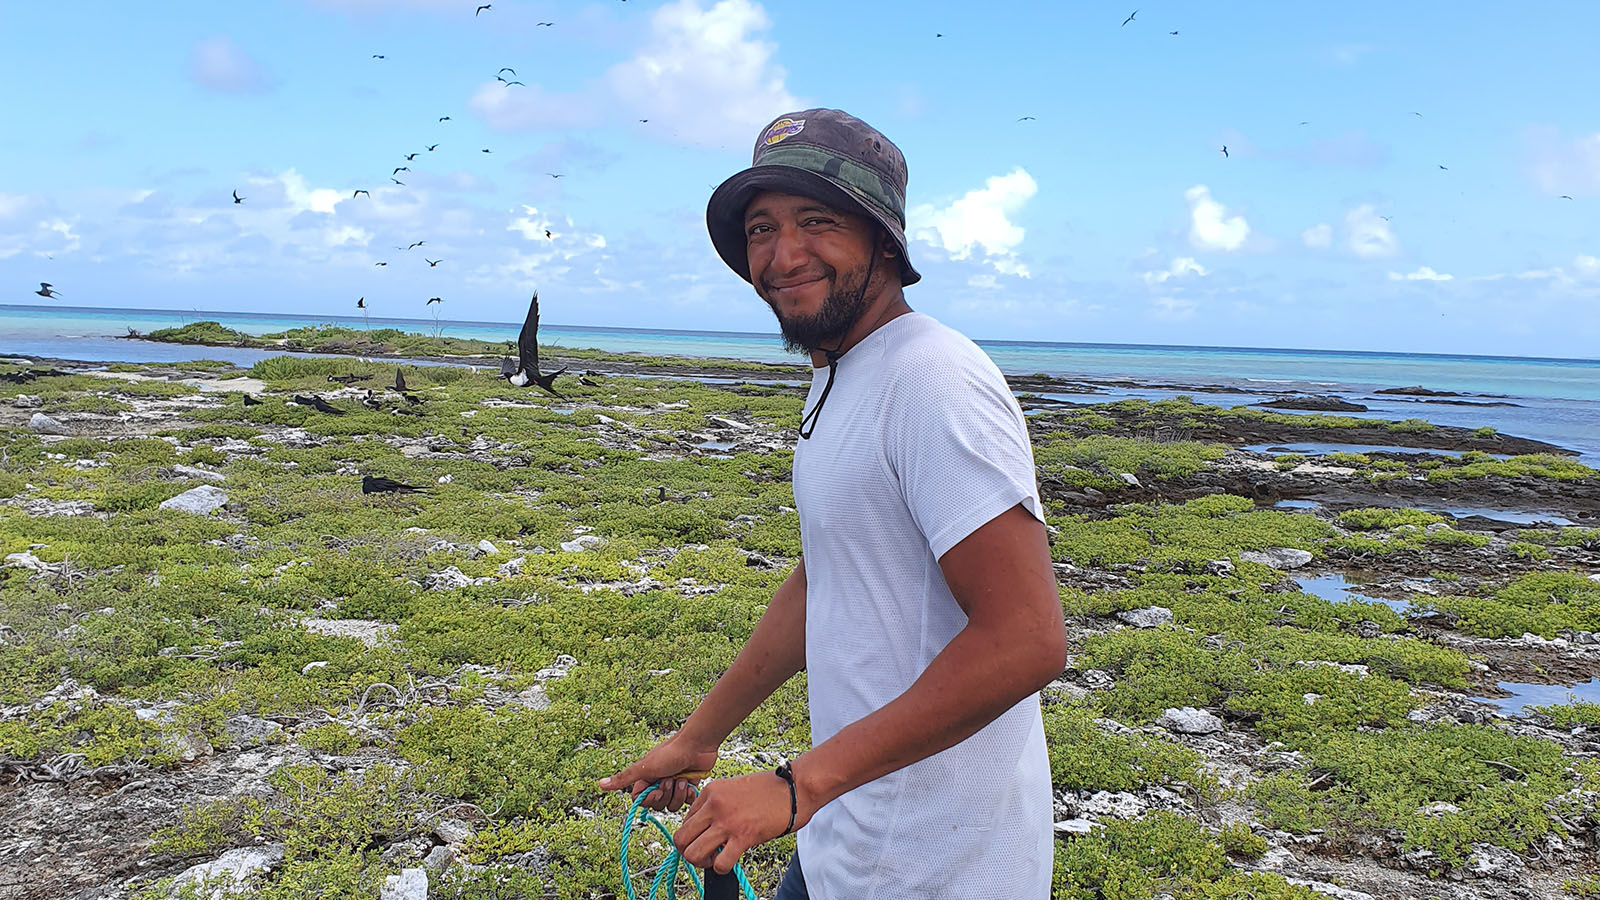 Promoting bird conservation in the Cook Islands